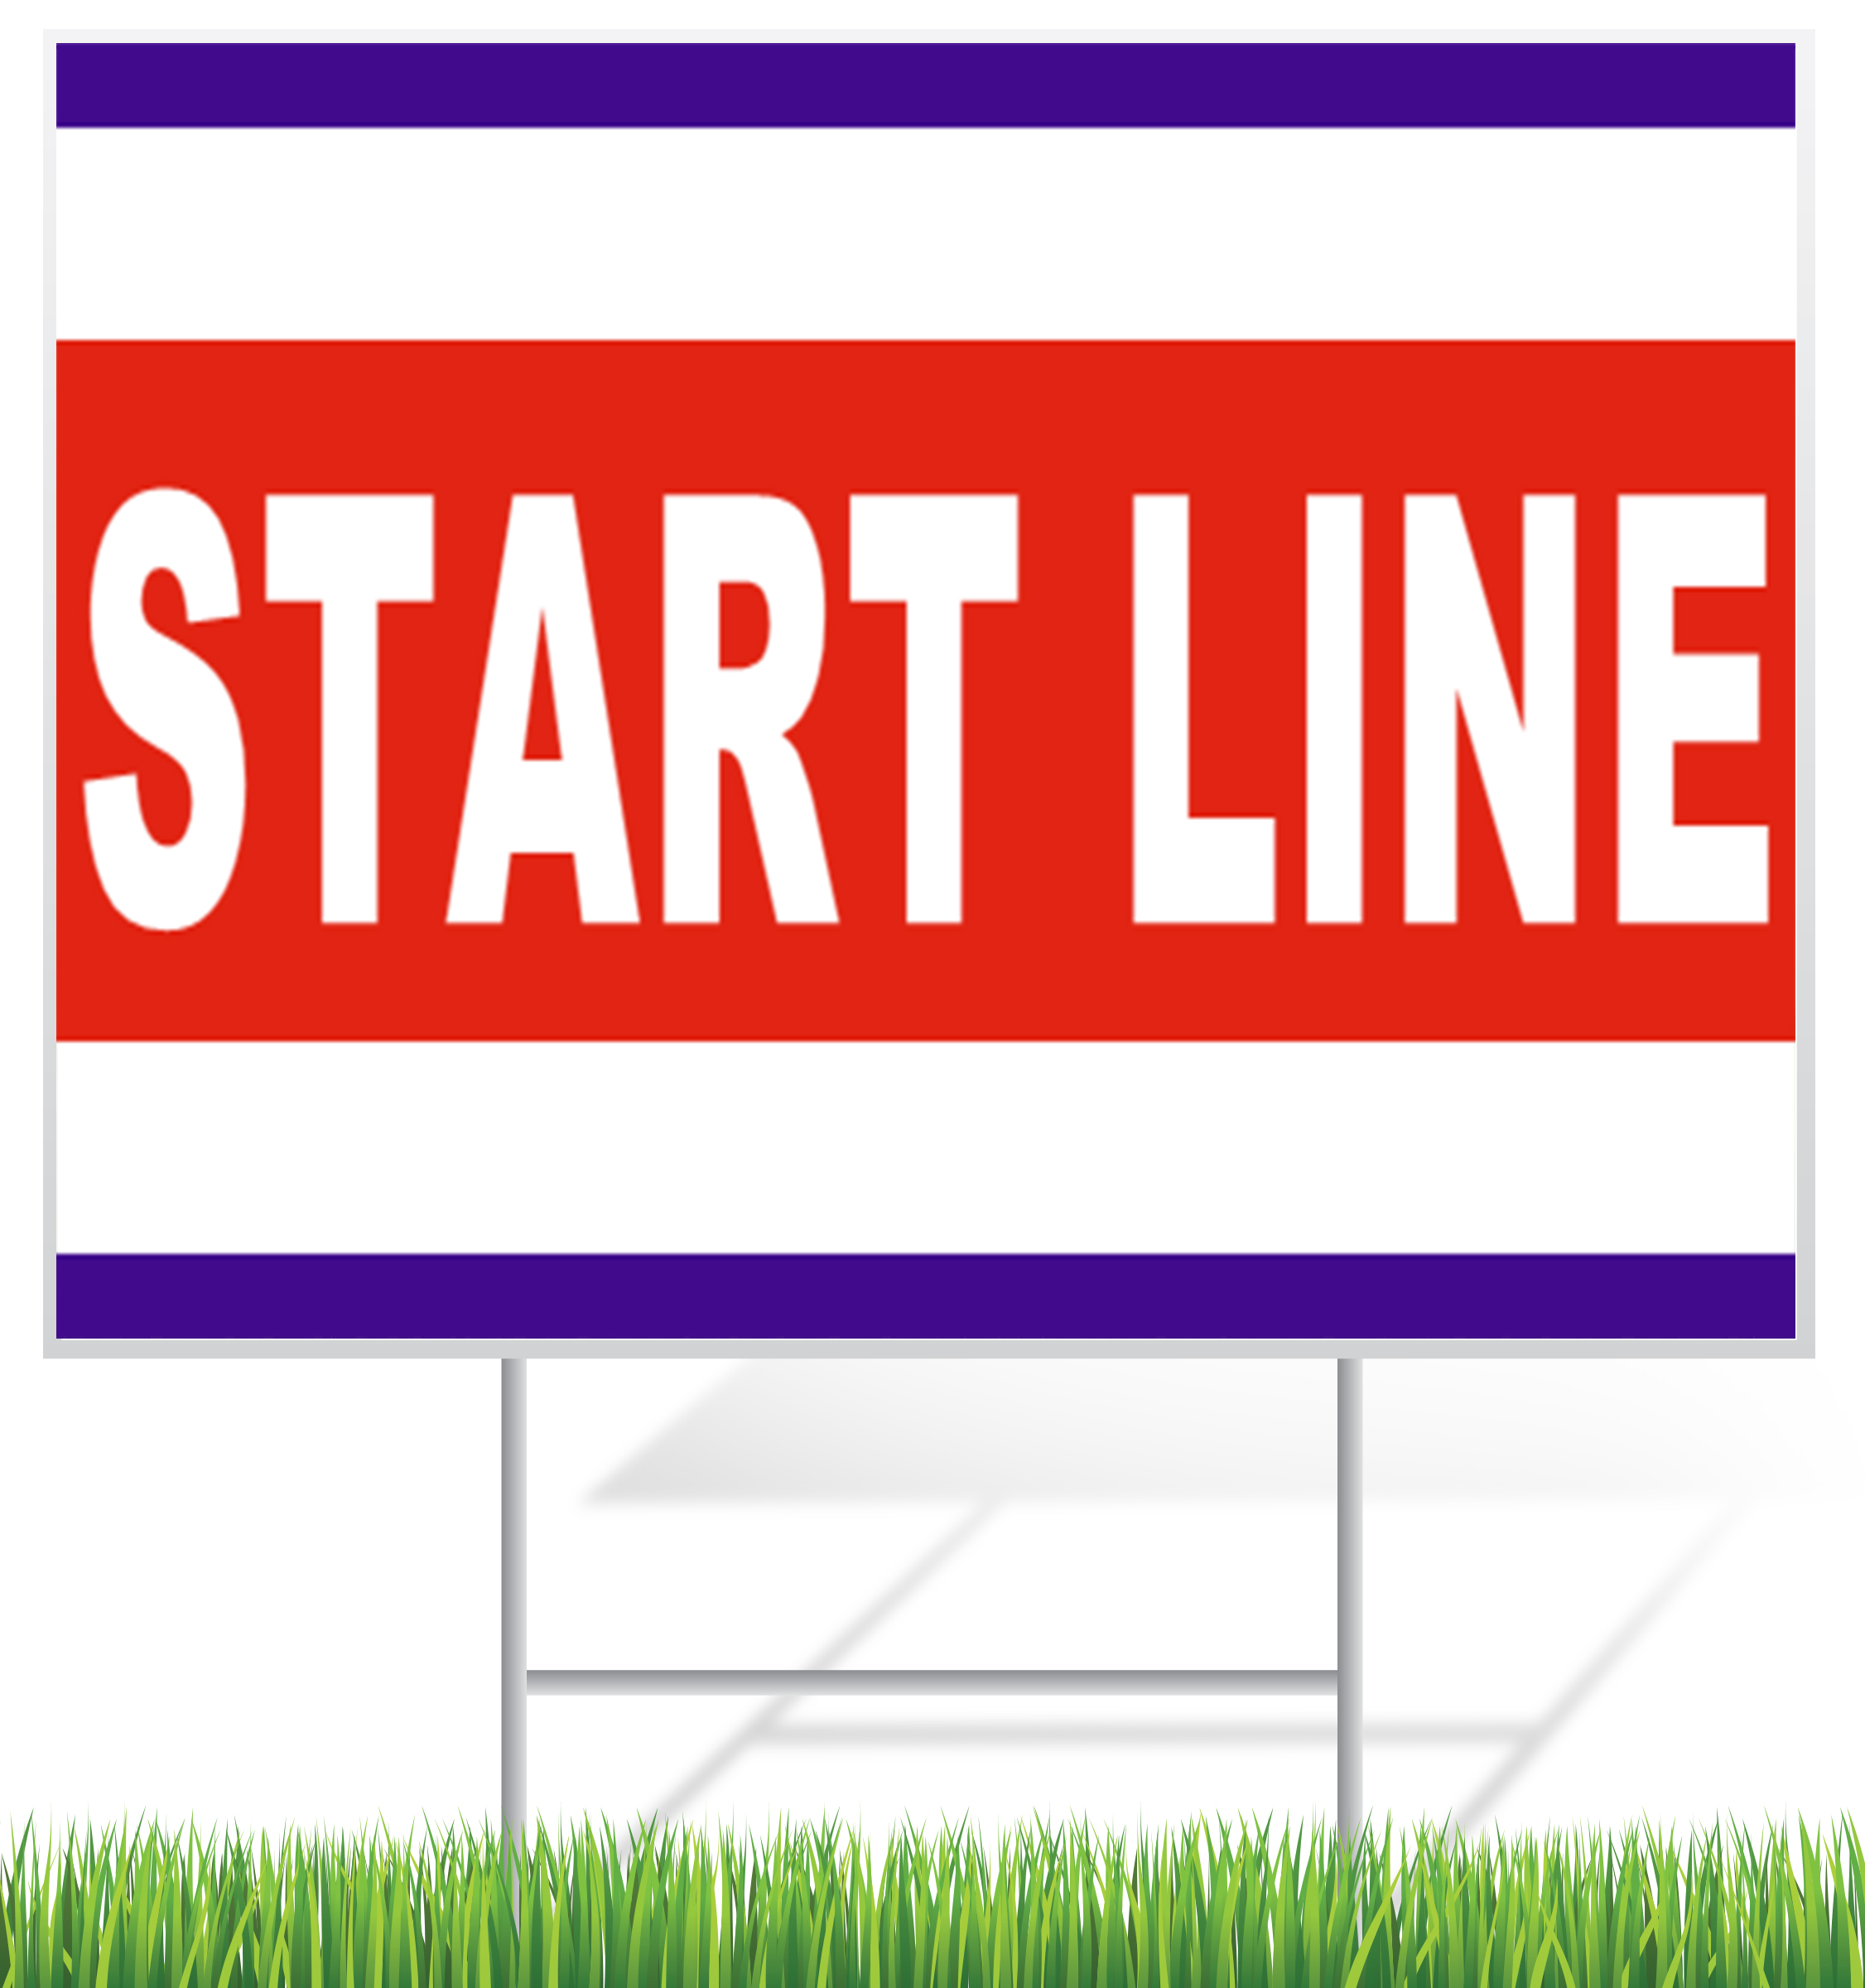 Start Line Lawn Sign Example | LawnSigns.com